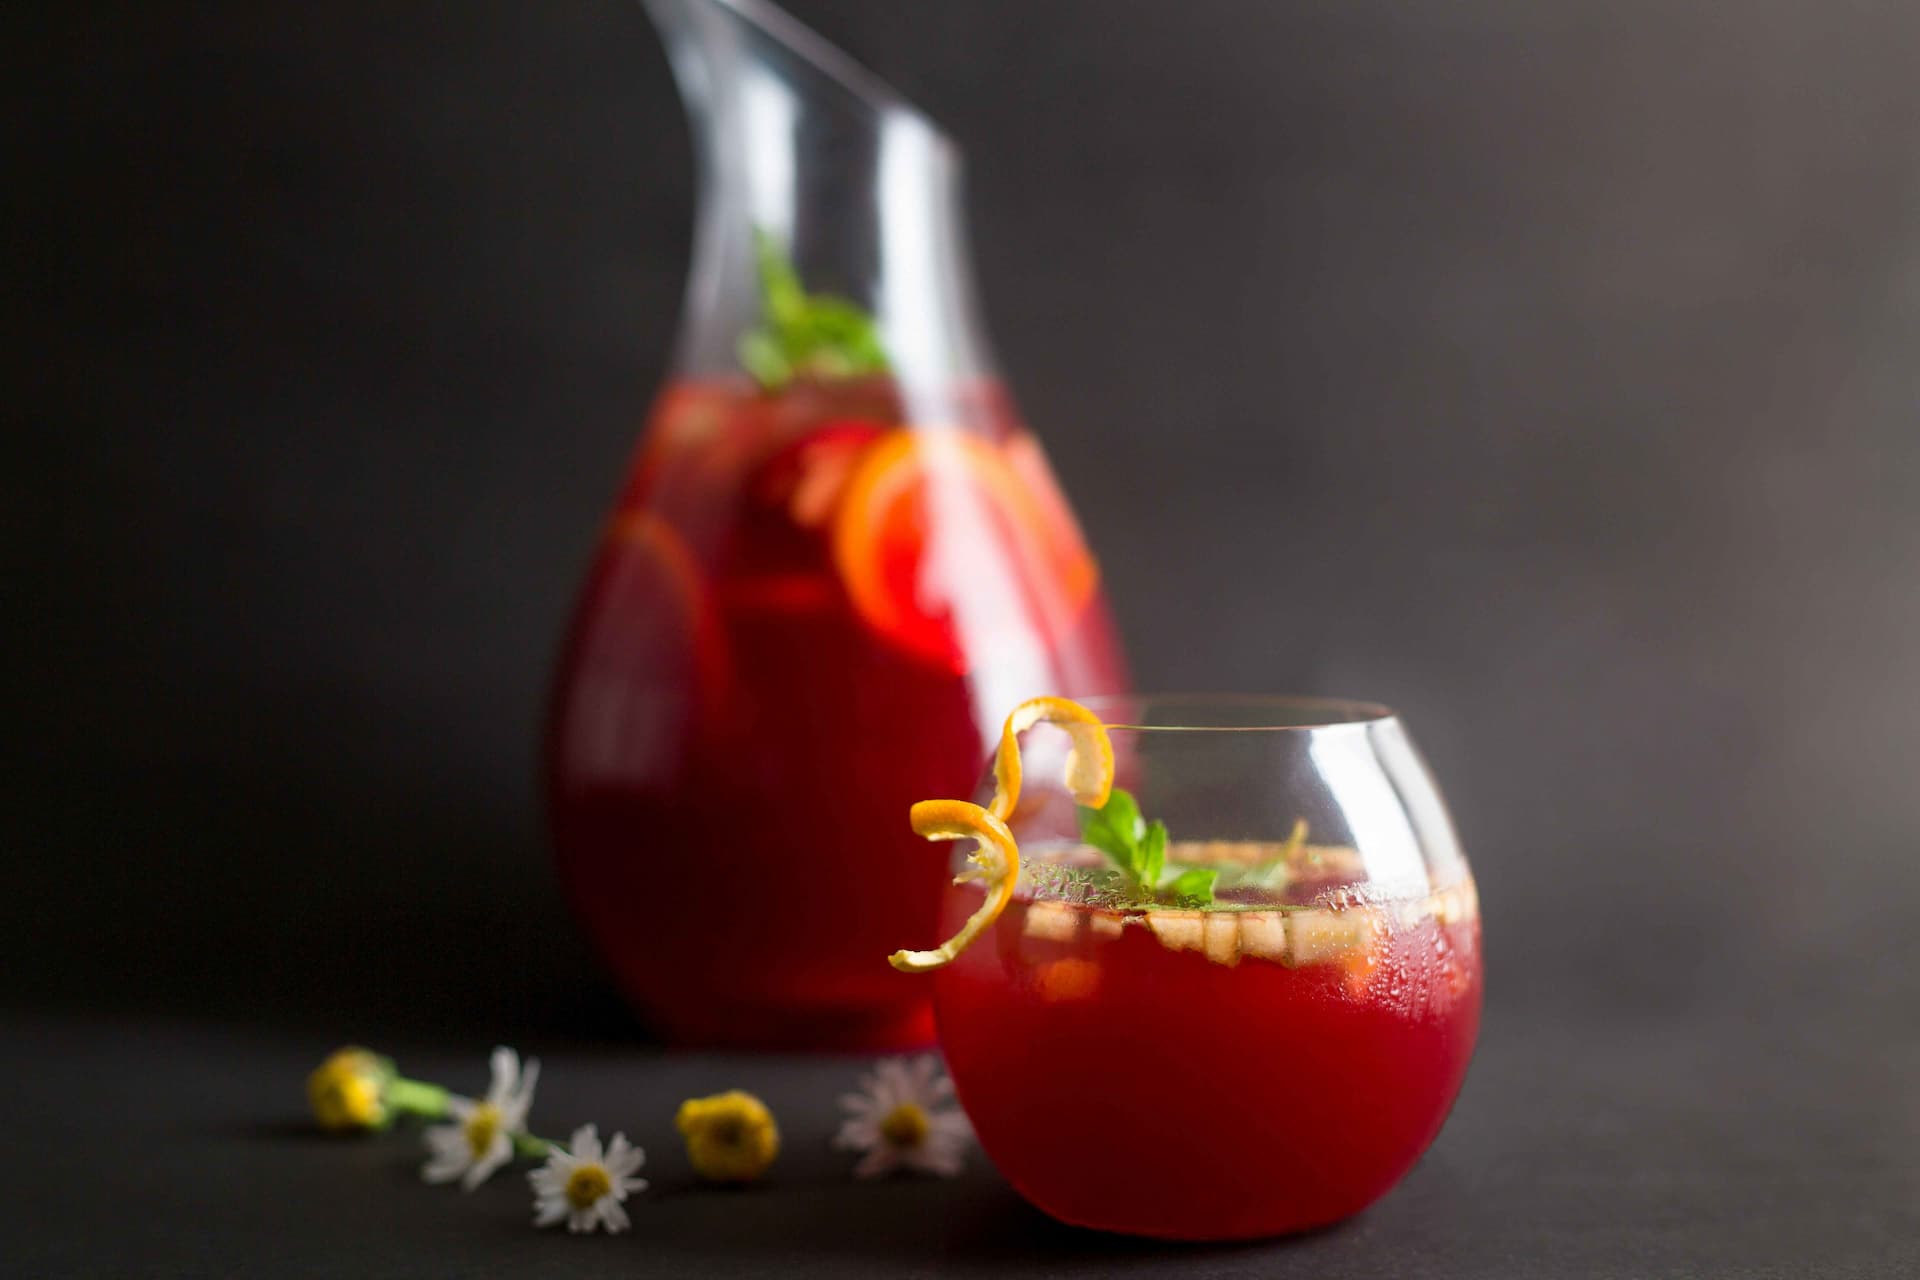 Hosting A Sangria Party? Try These 5 Lip-Smacking Food Pairings